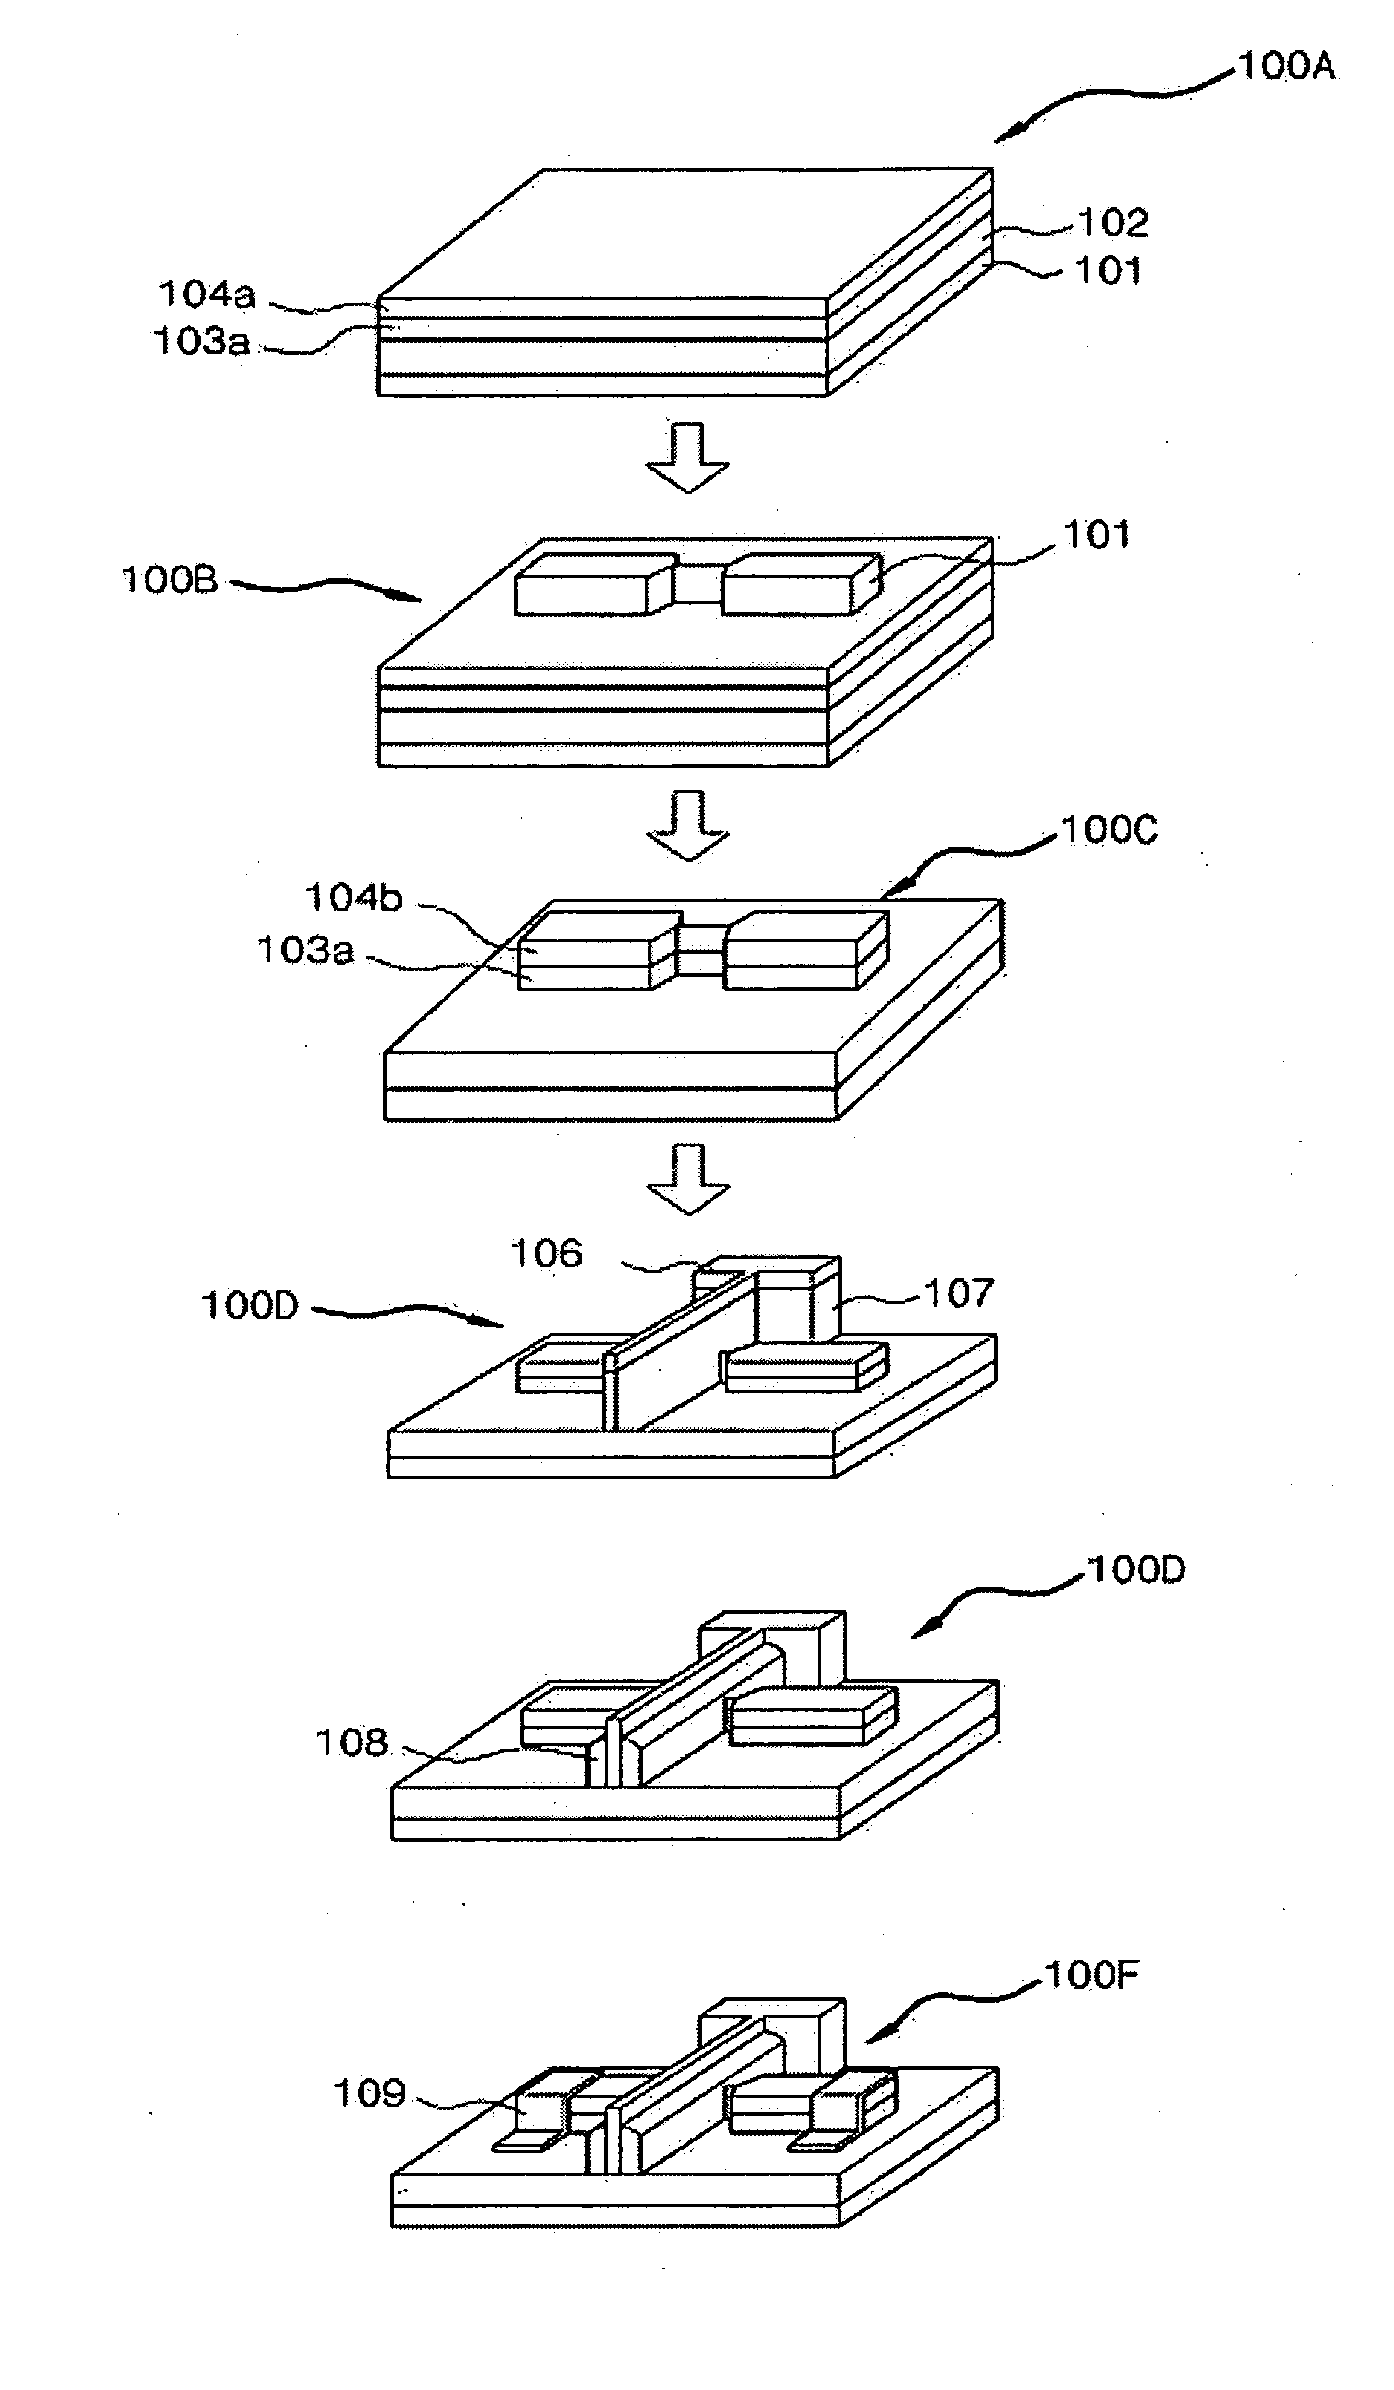 Method for manufacturing field effect transistor having channel consisting of silicon fins and silicon body and transistor structure manufactured thereby